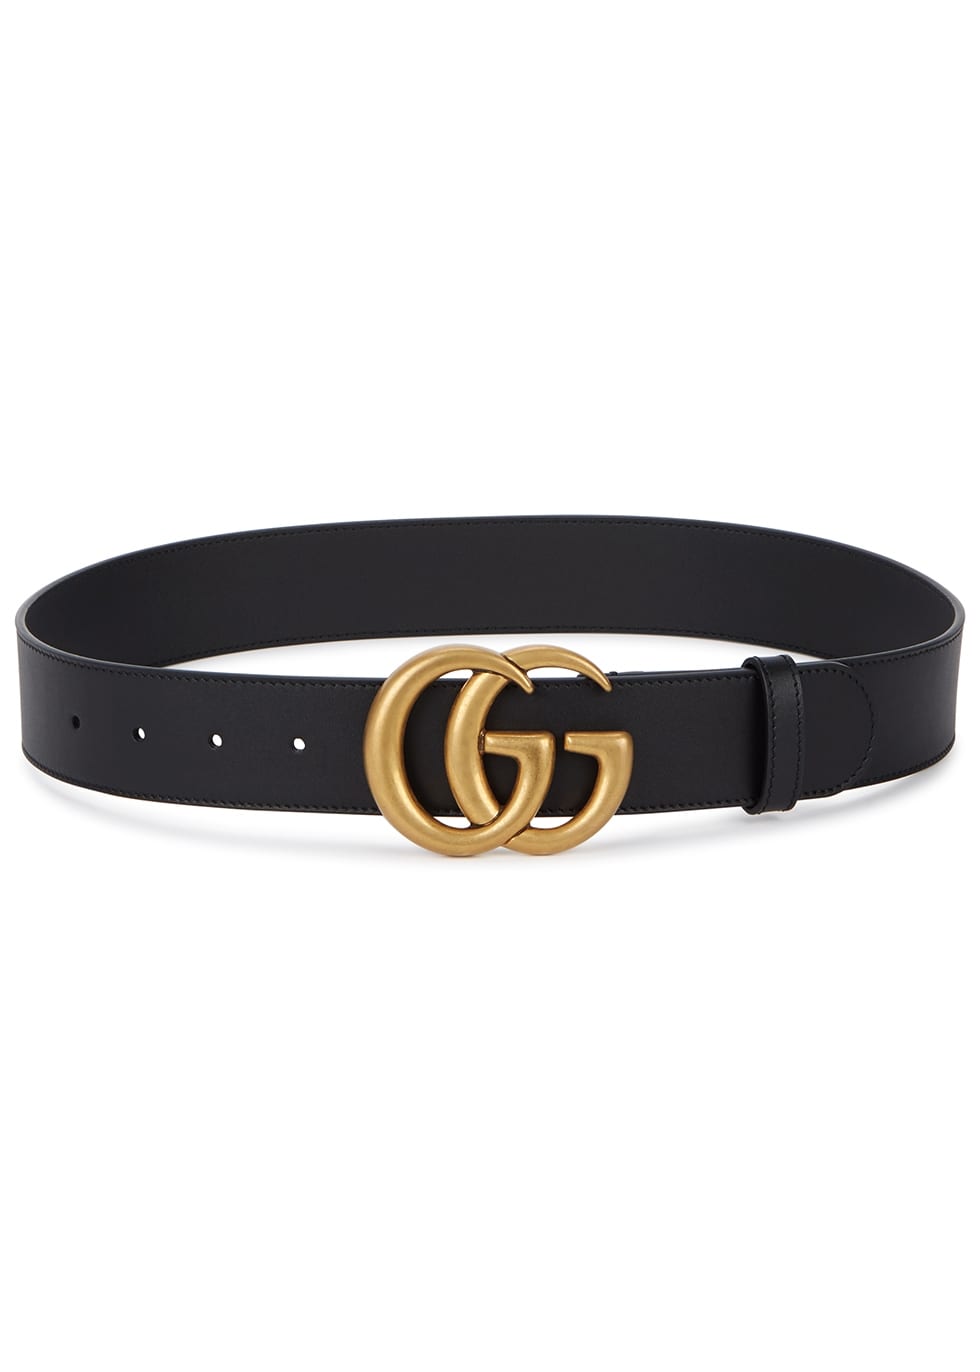 black leather belt with gold GC buckle